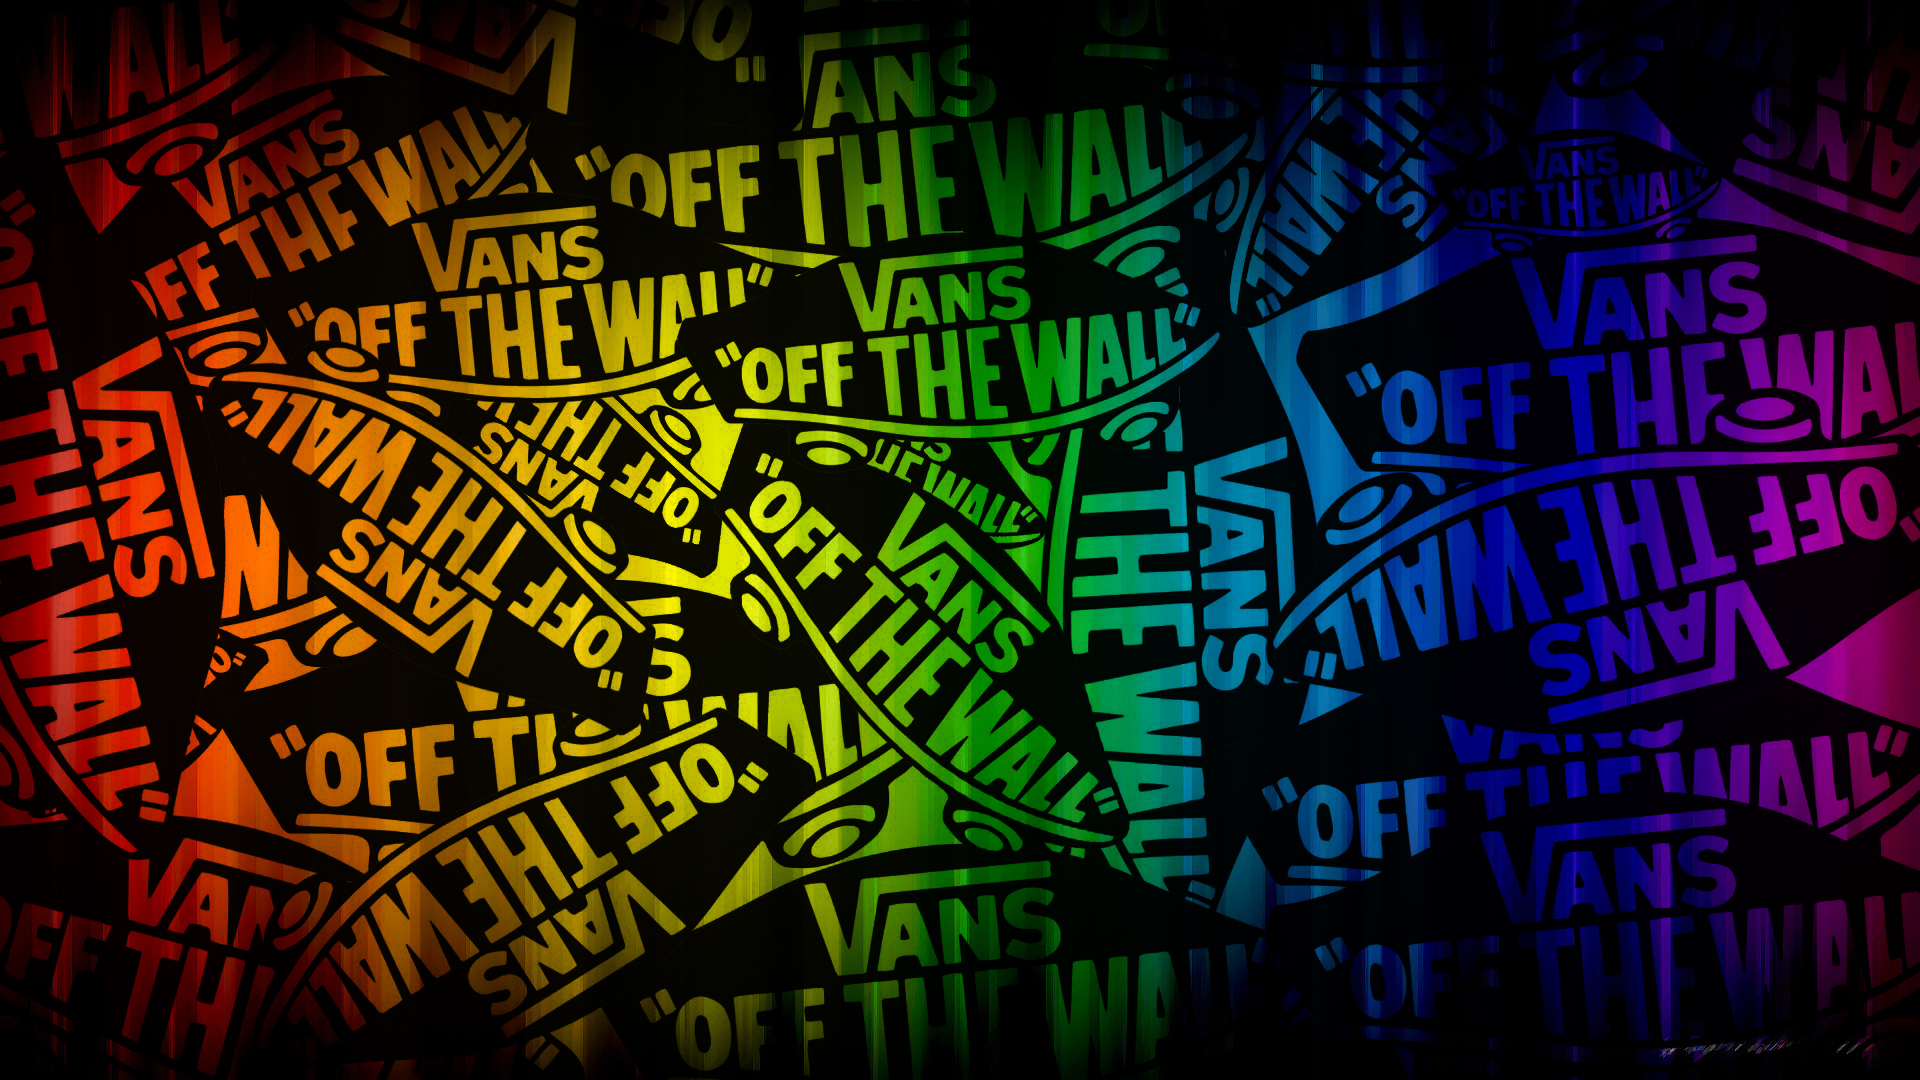 74+] Vans Off The Wall Wallpaper on